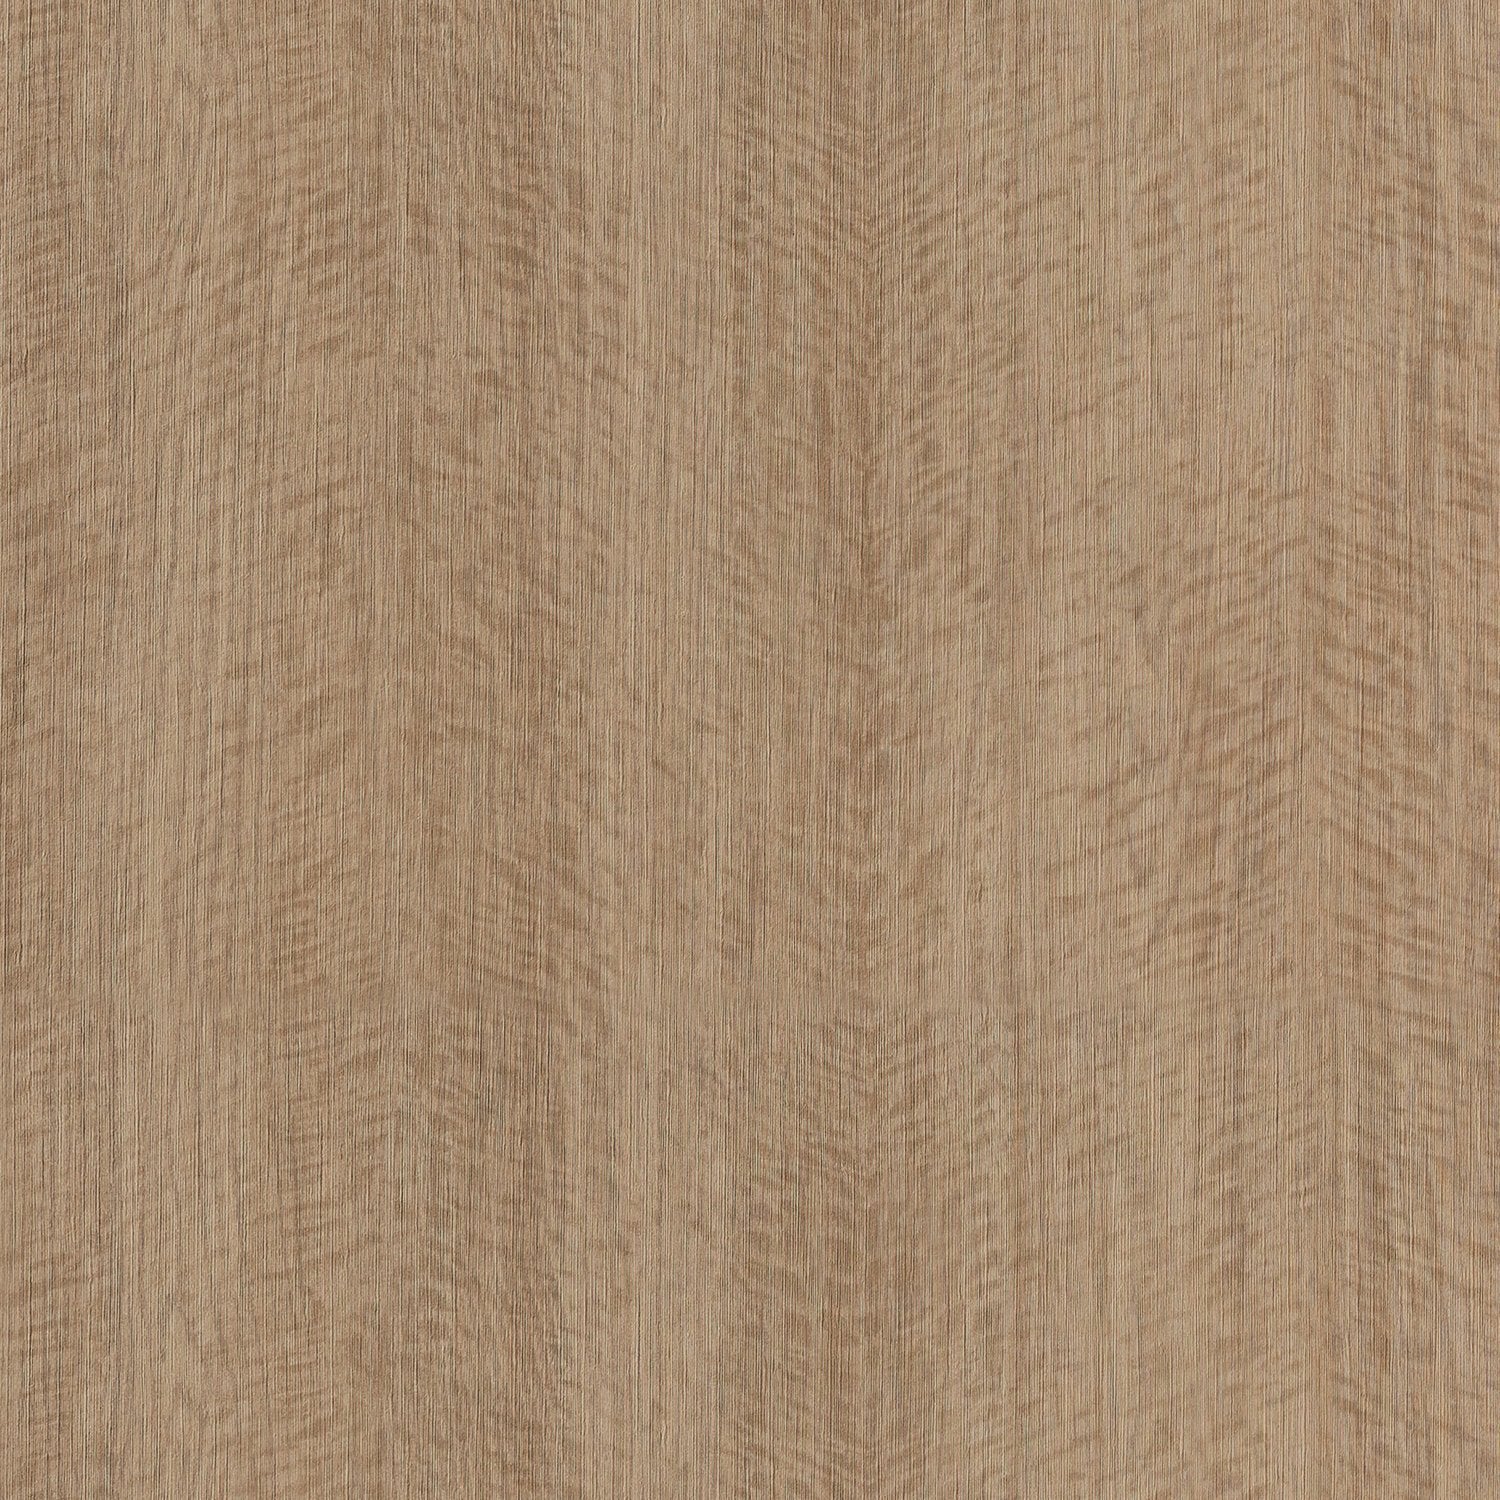 Woodn't It Be Nice - Y47879 - Wallcovering - Vycon - Kube Contract